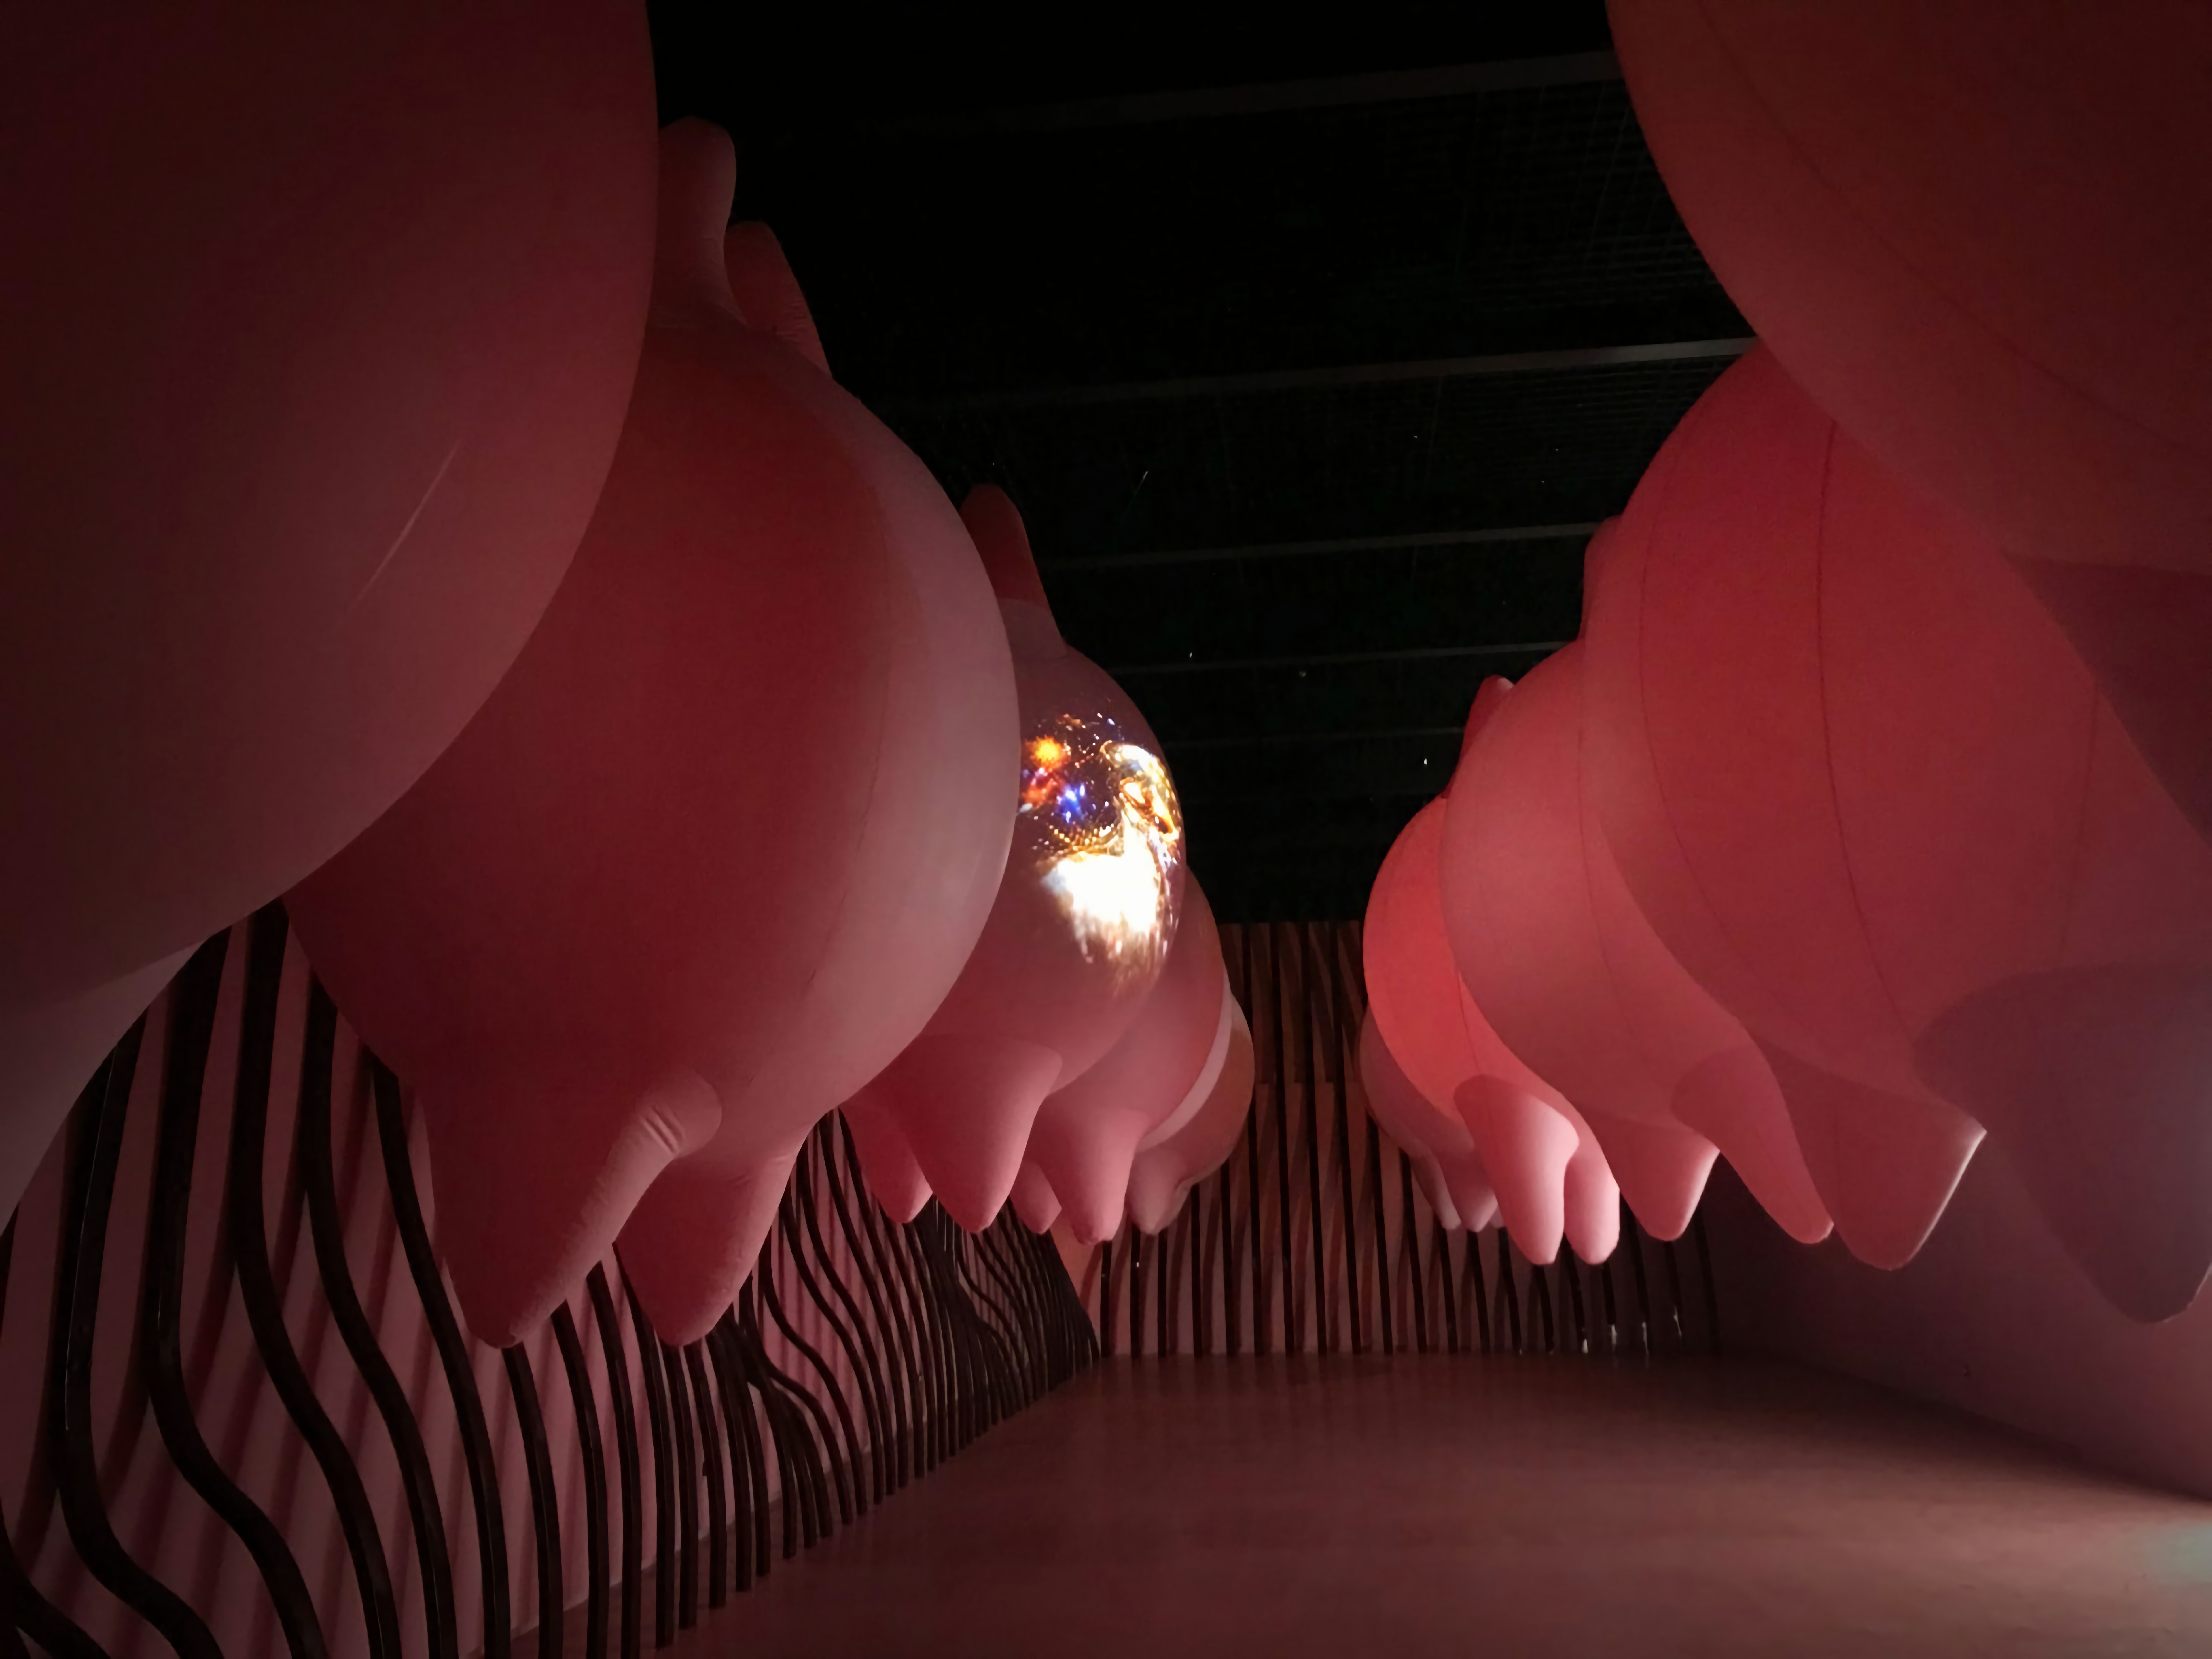 A Collection of "Womb" at the Eden-Like Garden Installation, The 59th Venice Biennale